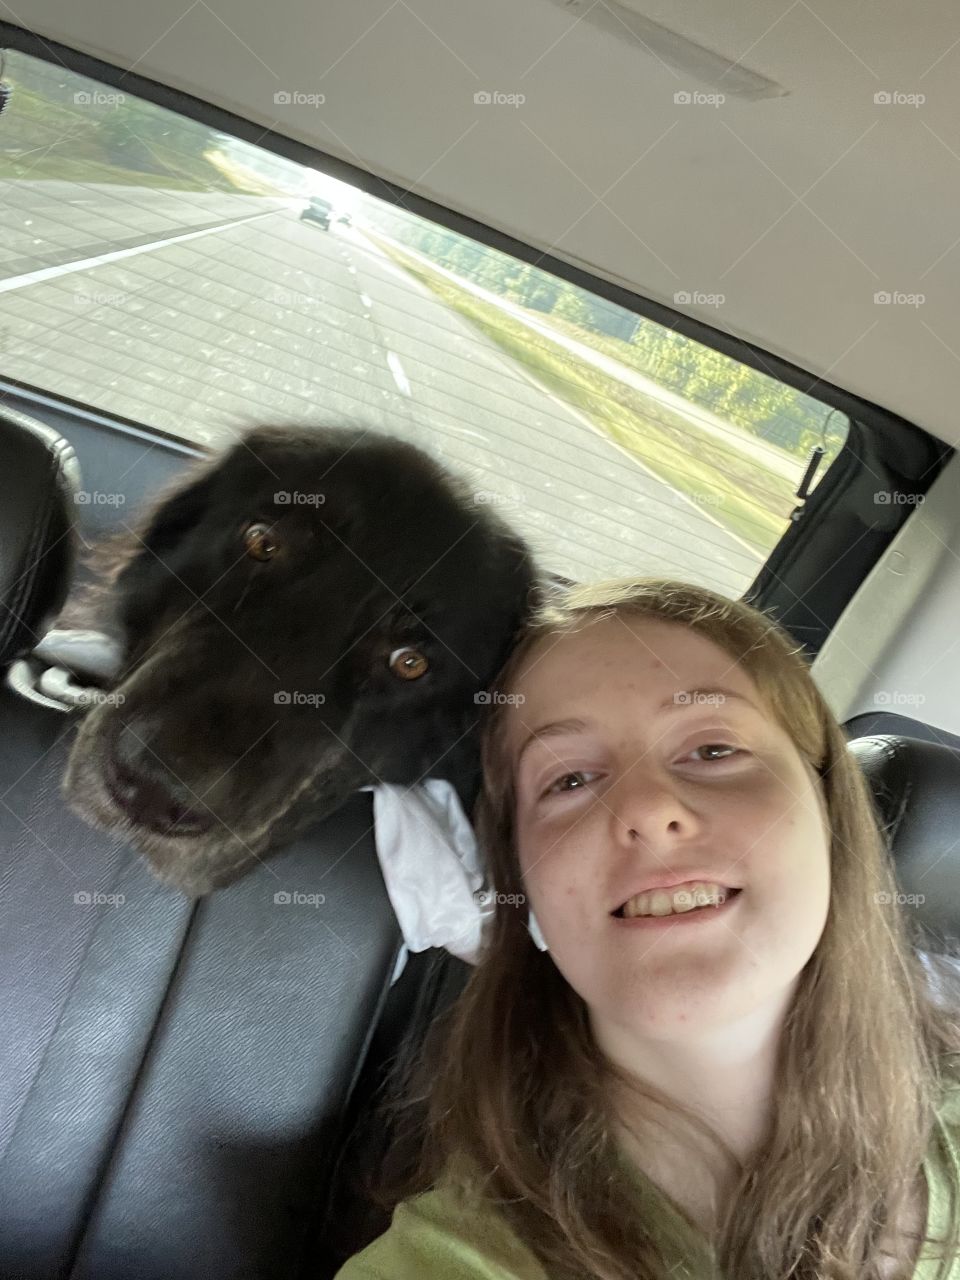 On the road with my dog! 